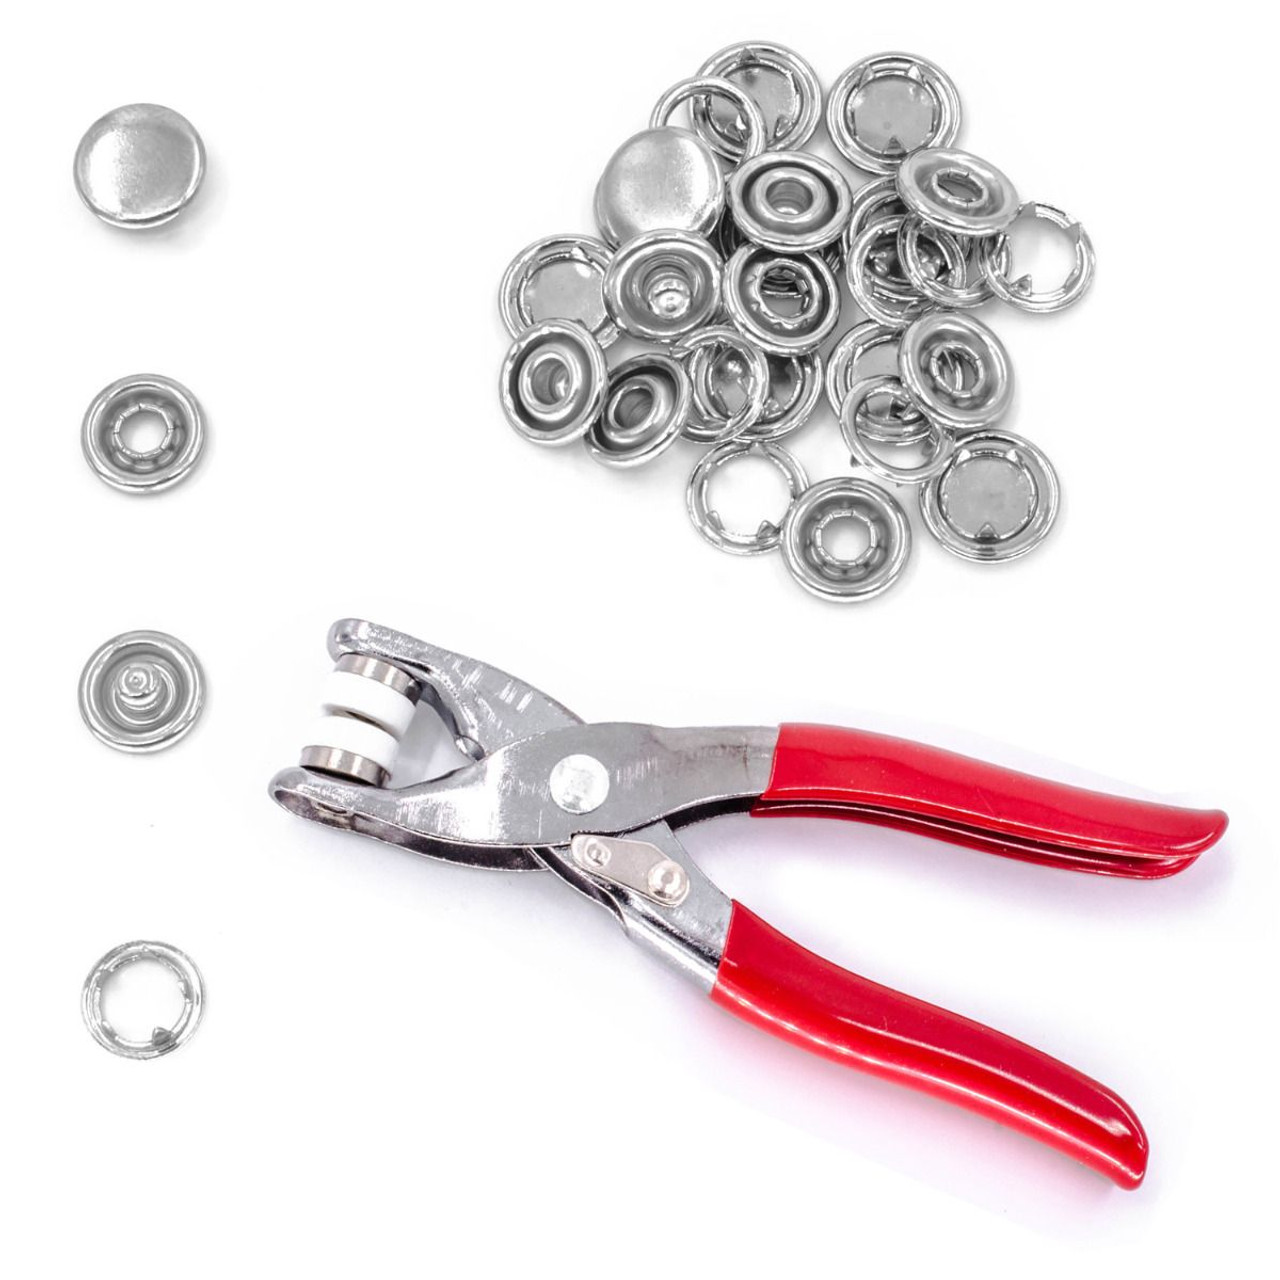 100pcs Jersey Cap Snap Poppers with Fixing Pliers